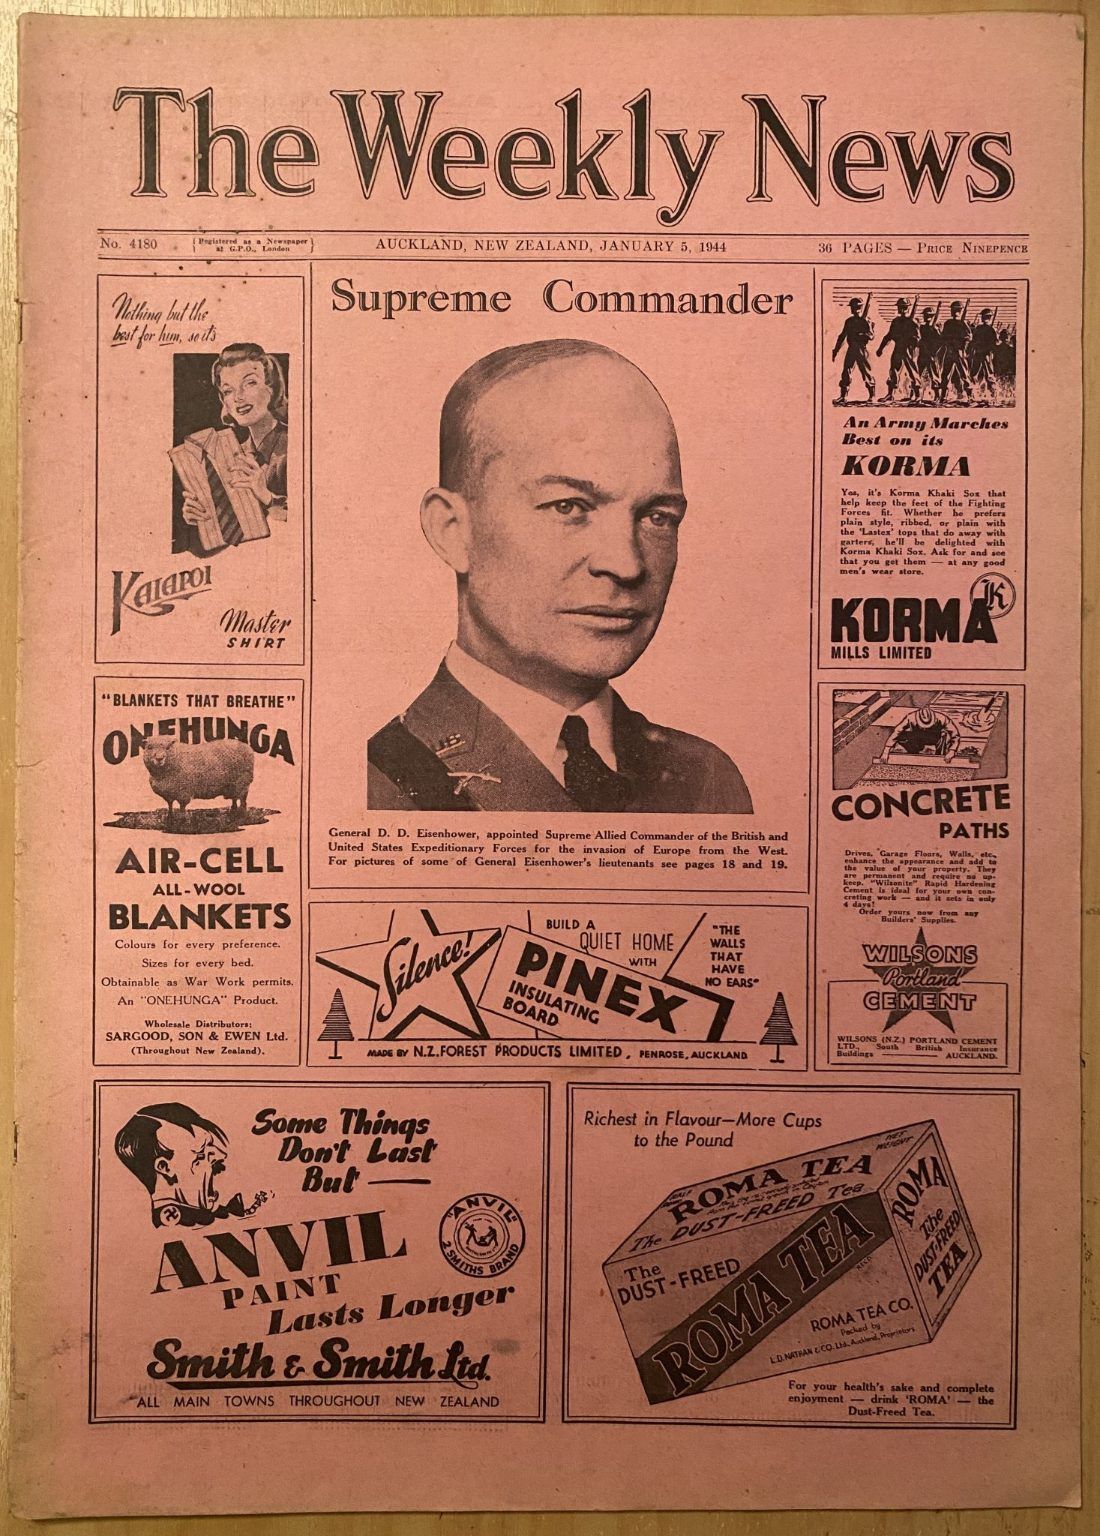 OLD NEWSPAPER: The Weekly News - No. 4180, 5 January 1944